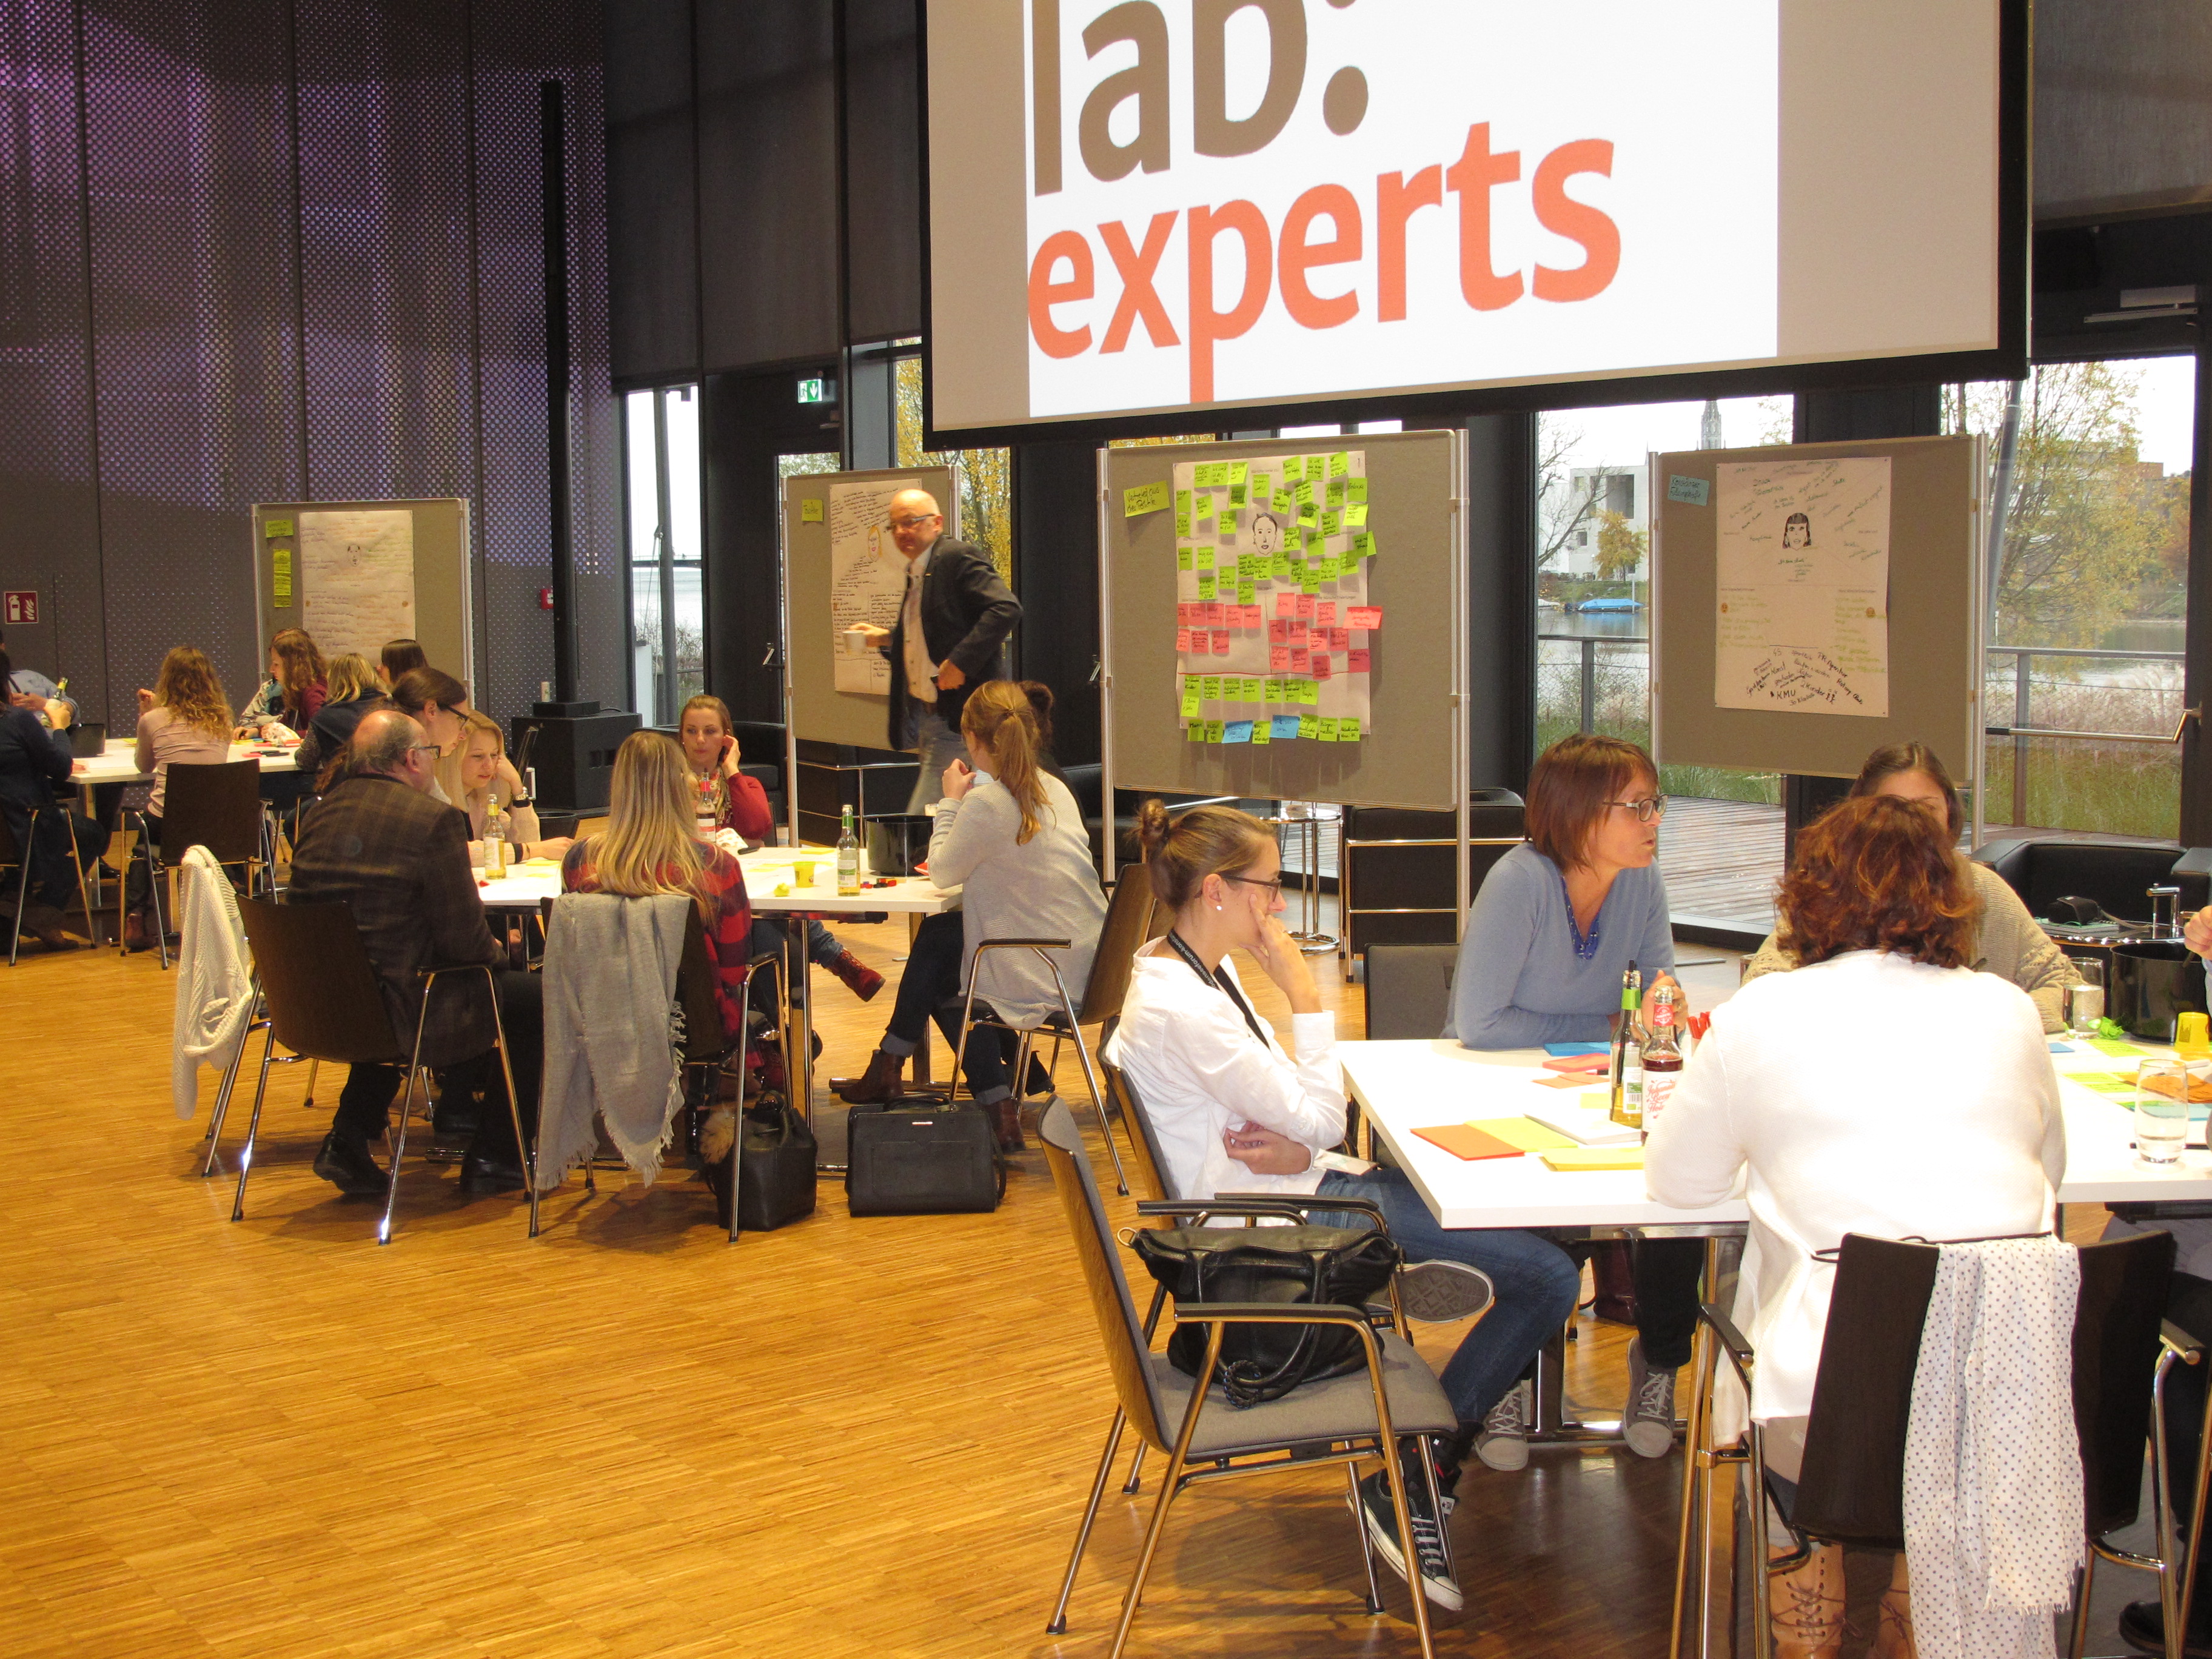 micelab:experts III Event Canvas